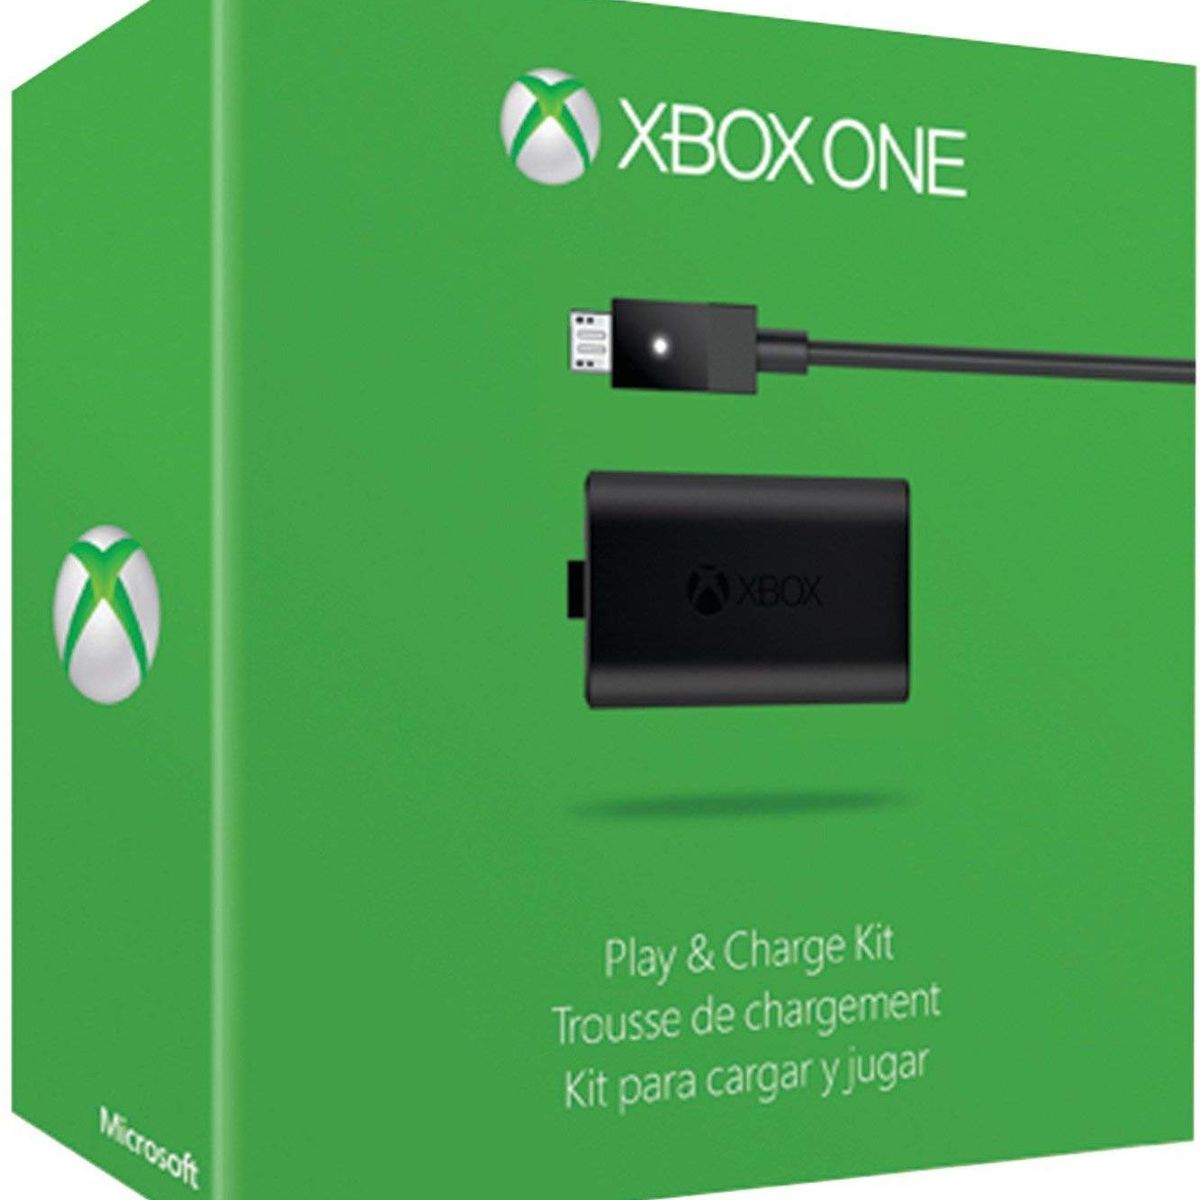 Product shot of the box for the Xbox One play and charge kit 